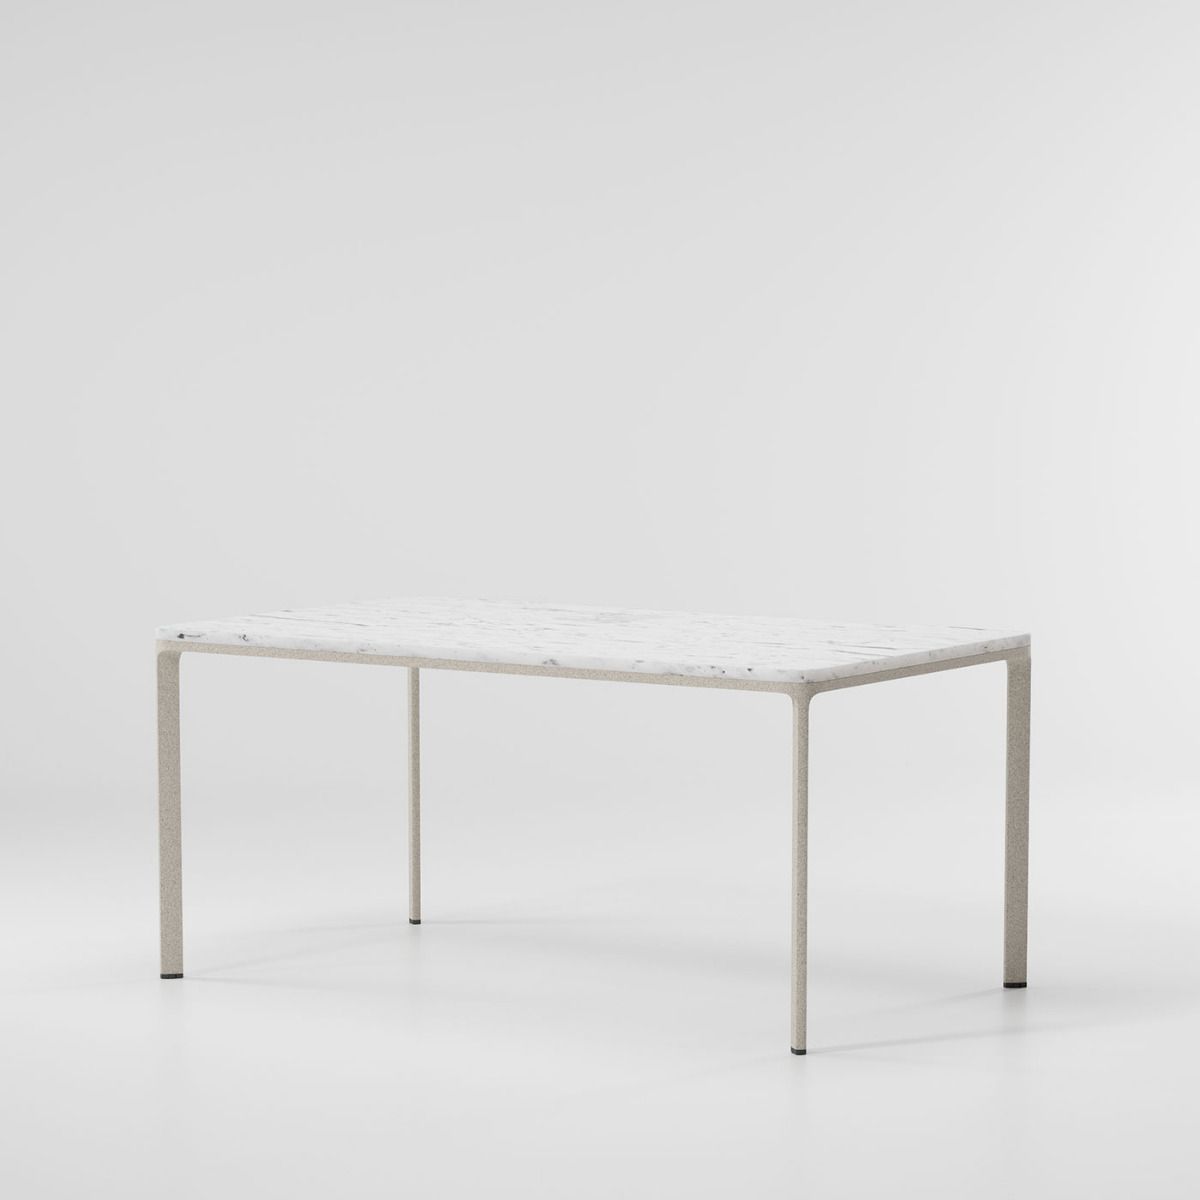 Kettal Park Life Dining Table 160x94 - 6 Guests